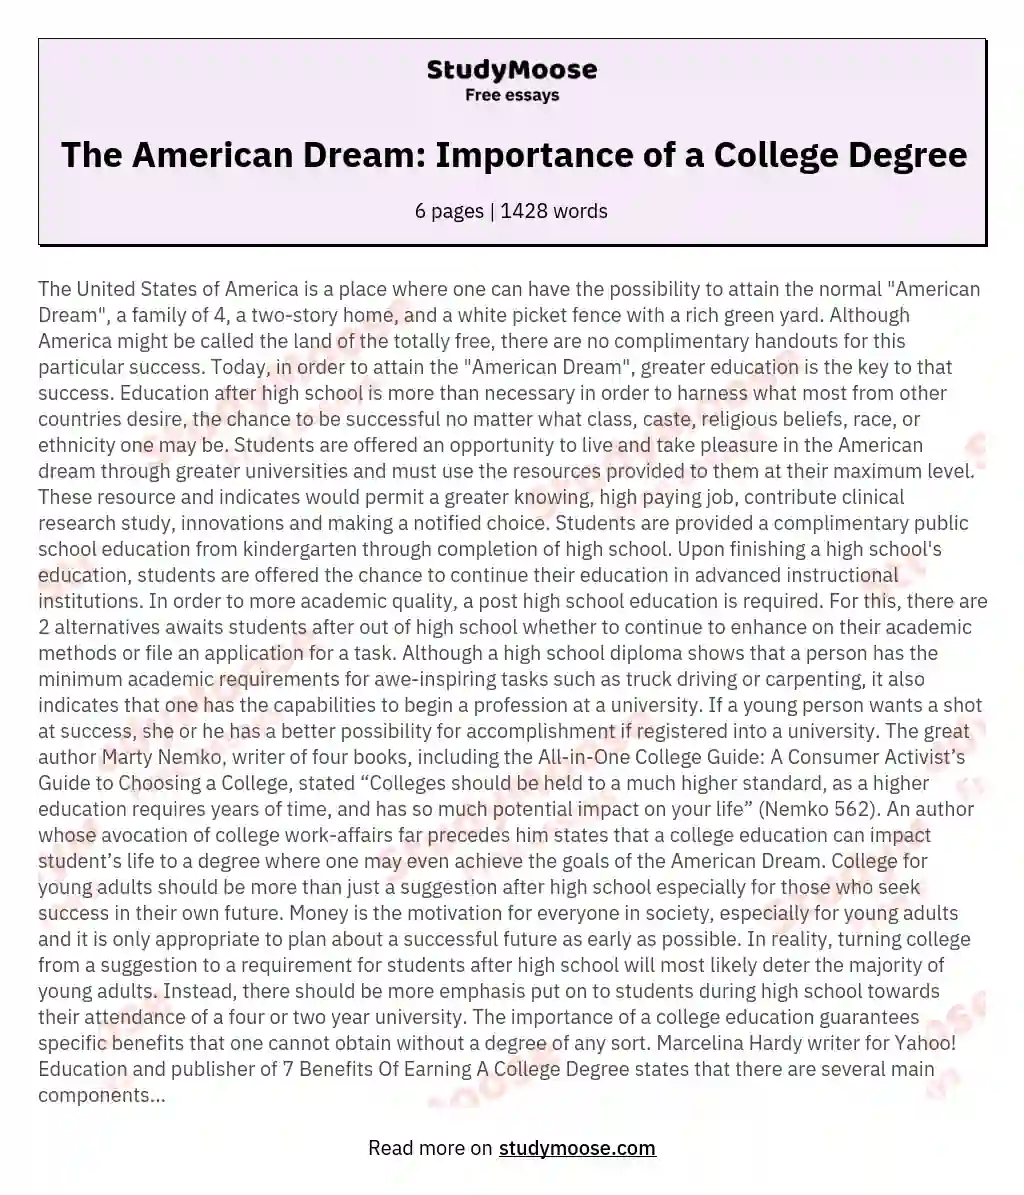 The American Dream: Importance of a College Degree essay